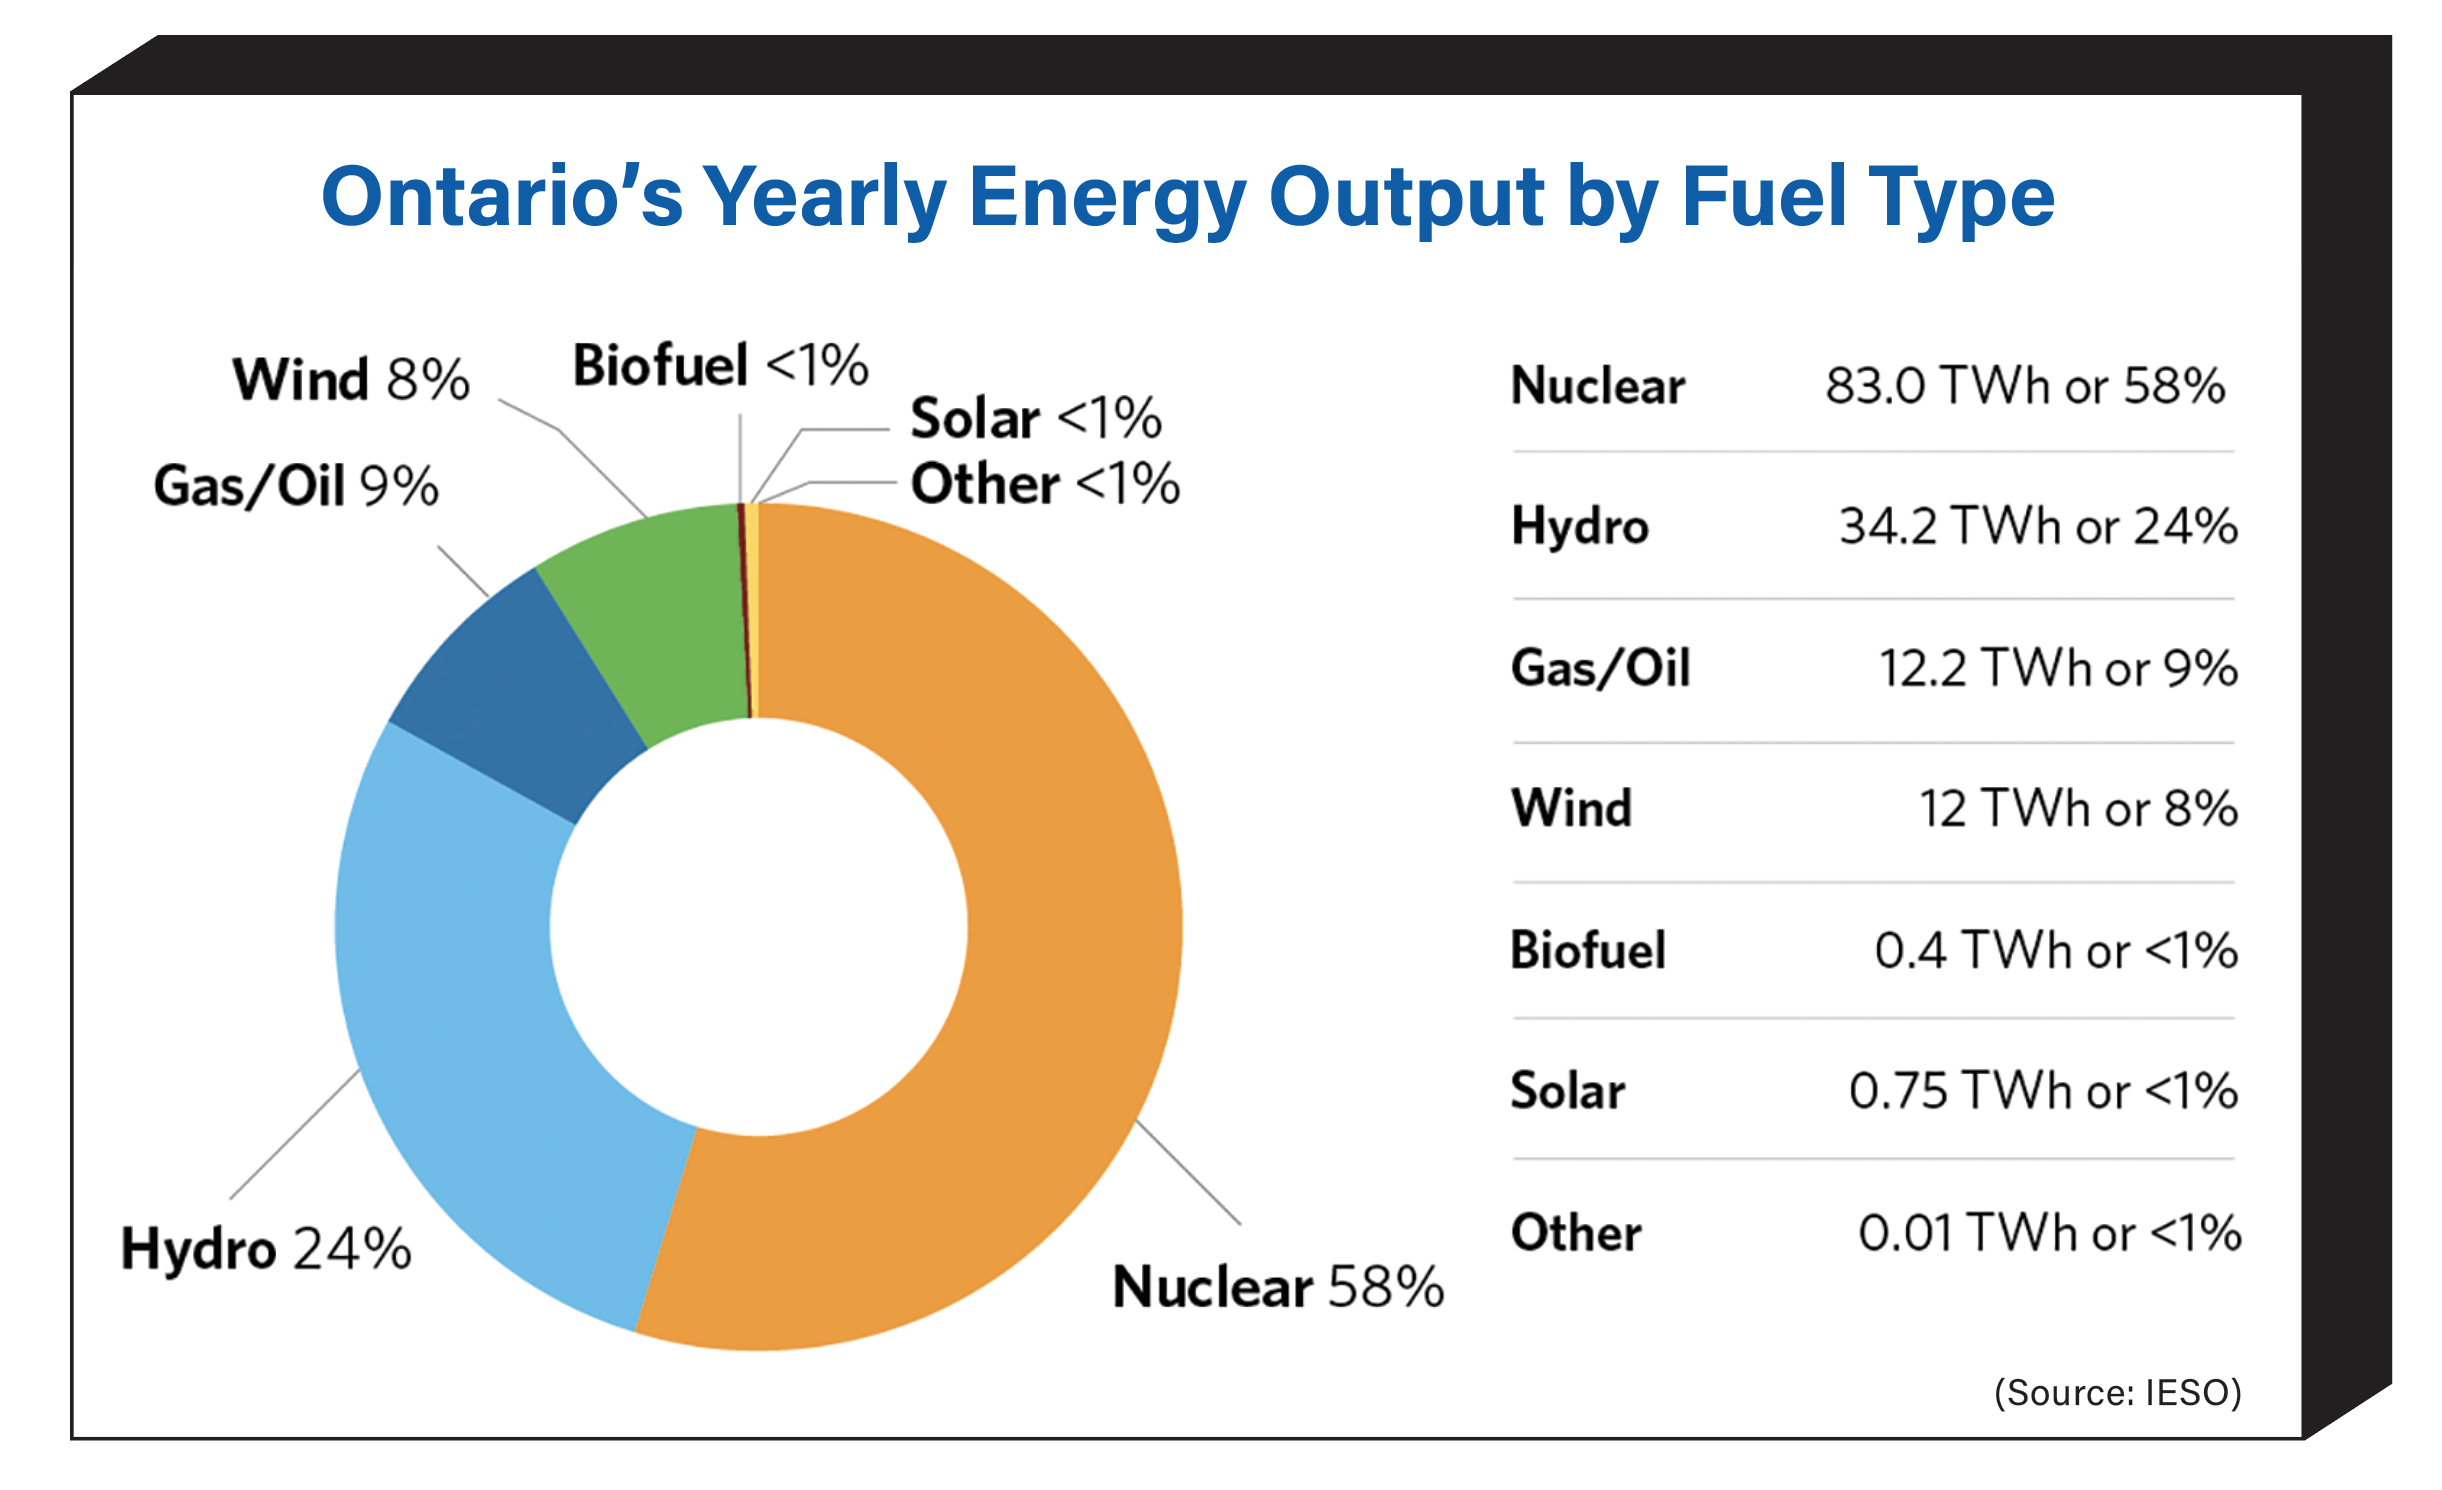 Ontario’s Yearly Energy Output by Fuel Type